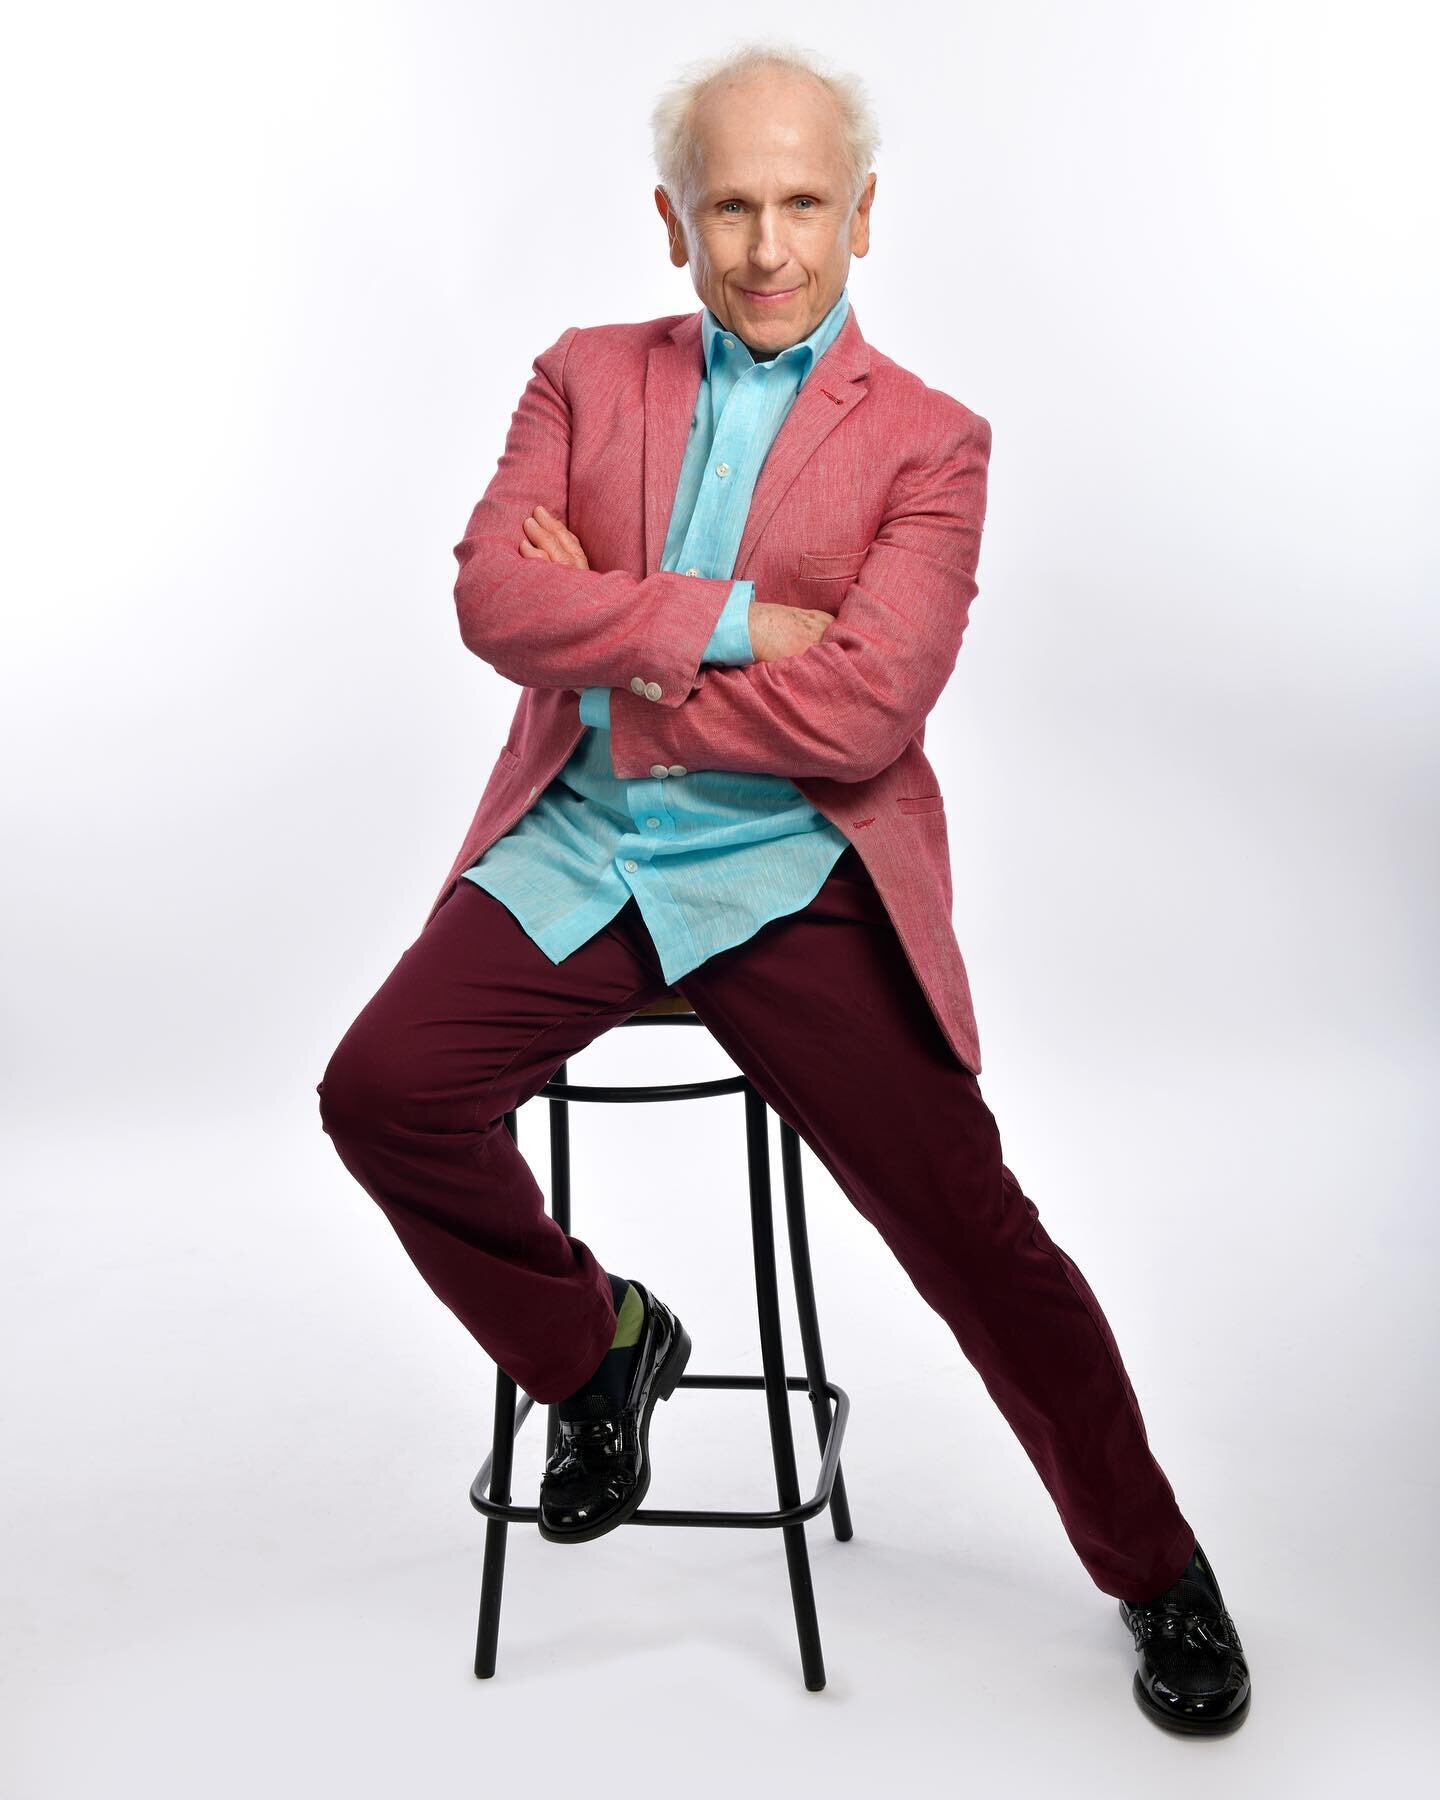 Excited to be performing onstage at the South Holland Centre this Friday! Book your tickets on the link below. WS x https://www.southhollandcentre.co.uk/whats-on/view/an-evening-with-wayne-sleep